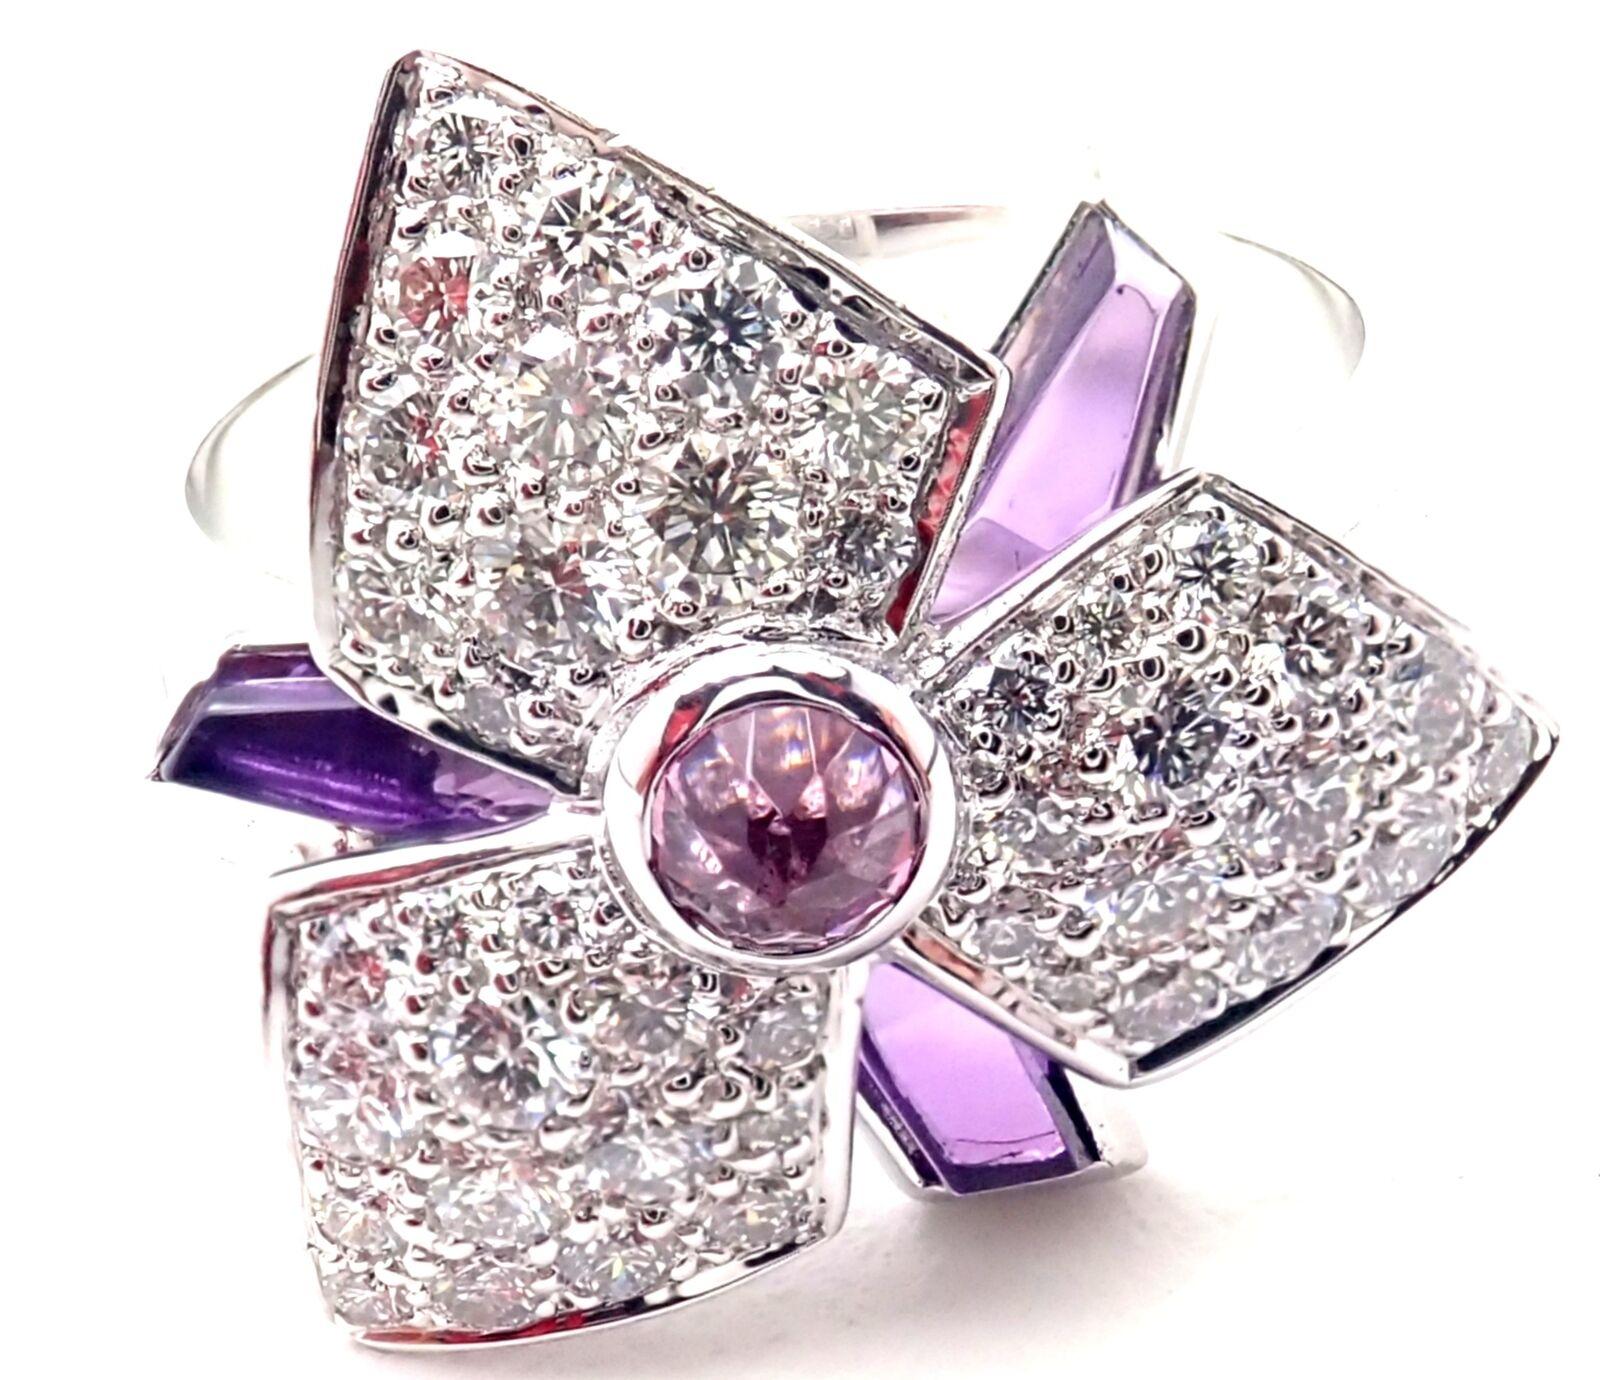 18k White Gold Diamond Amethyst Caresse D'orchidées Orchid Flower Ring by Cartier.
With Round brilliant cut diamonds VS1 clarity, E color total weight approx. .52ct
Amethysts
Details:
Size: European 49, US 4 3/4
Weight: 6.1 grams
Width: 